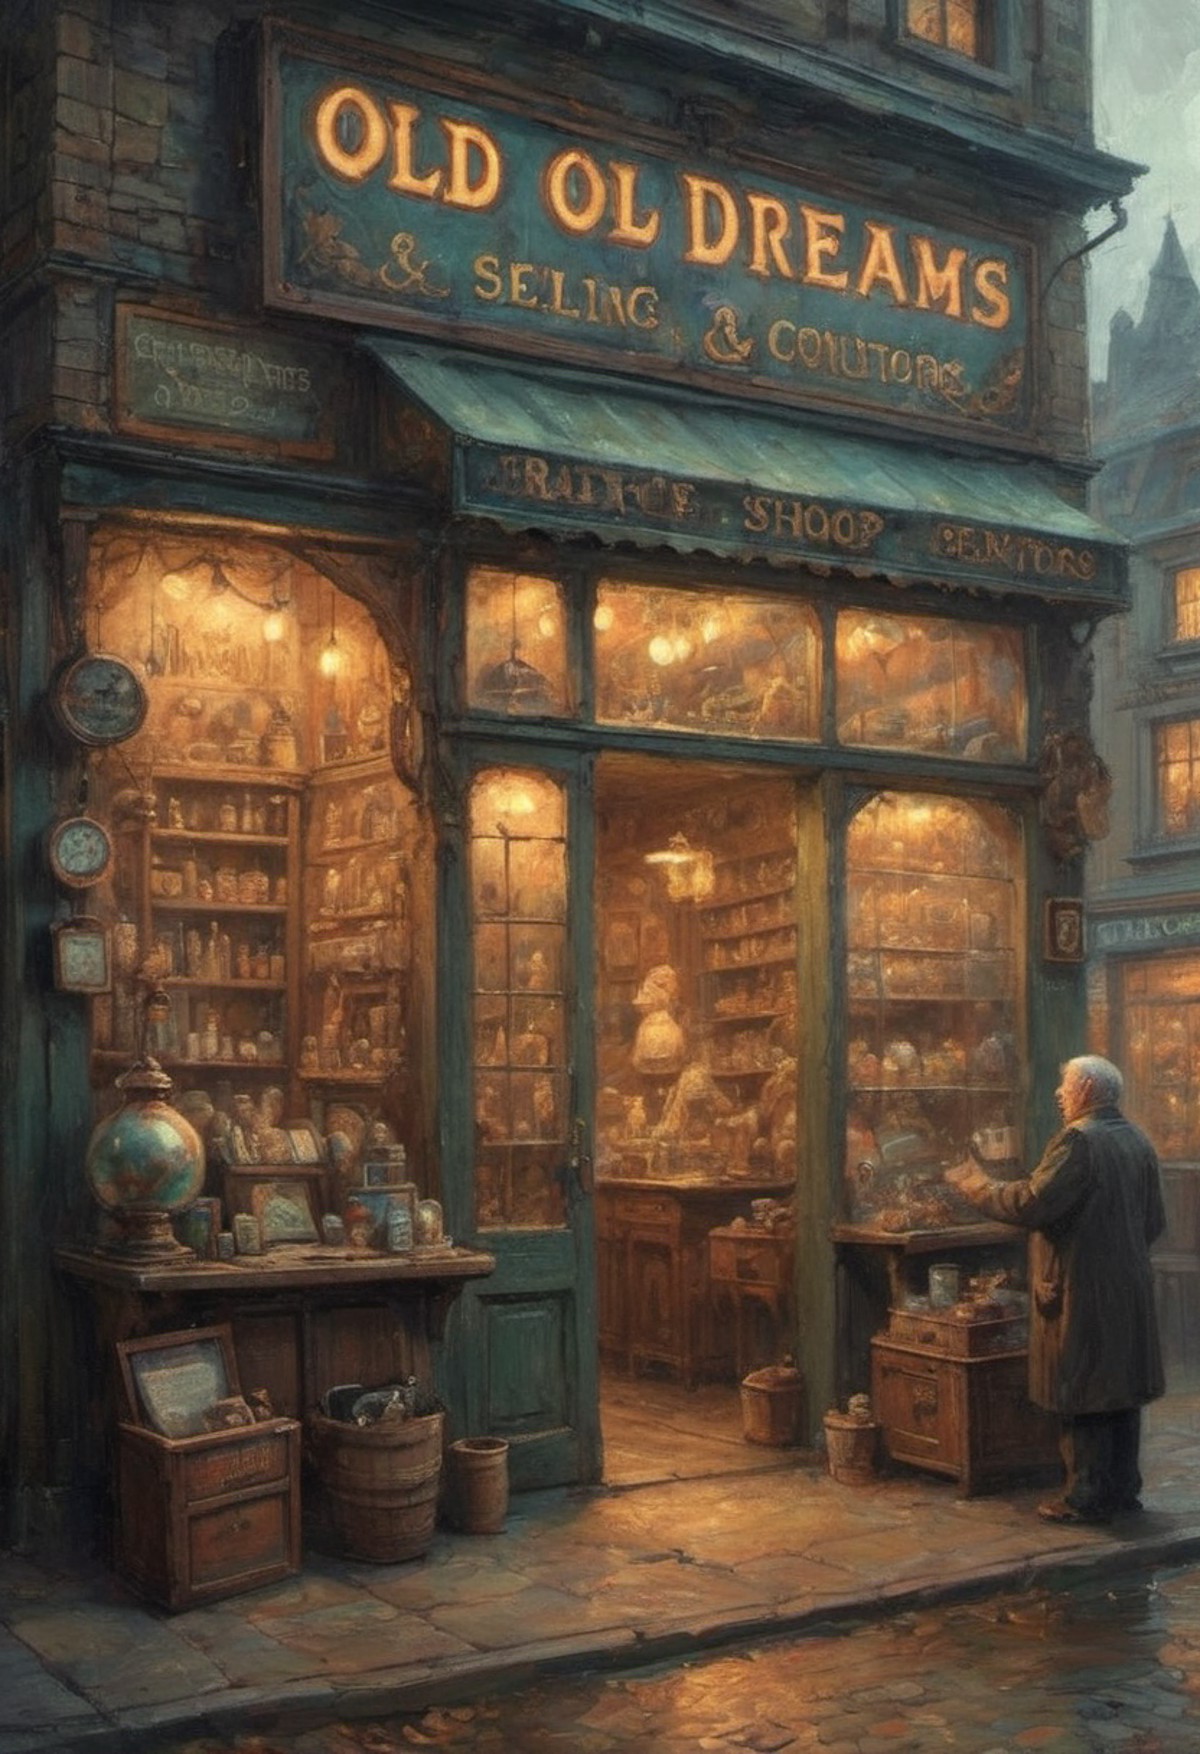 The old dreams-selling shop and its eccentric old proprietor curios magical glow highly detailed